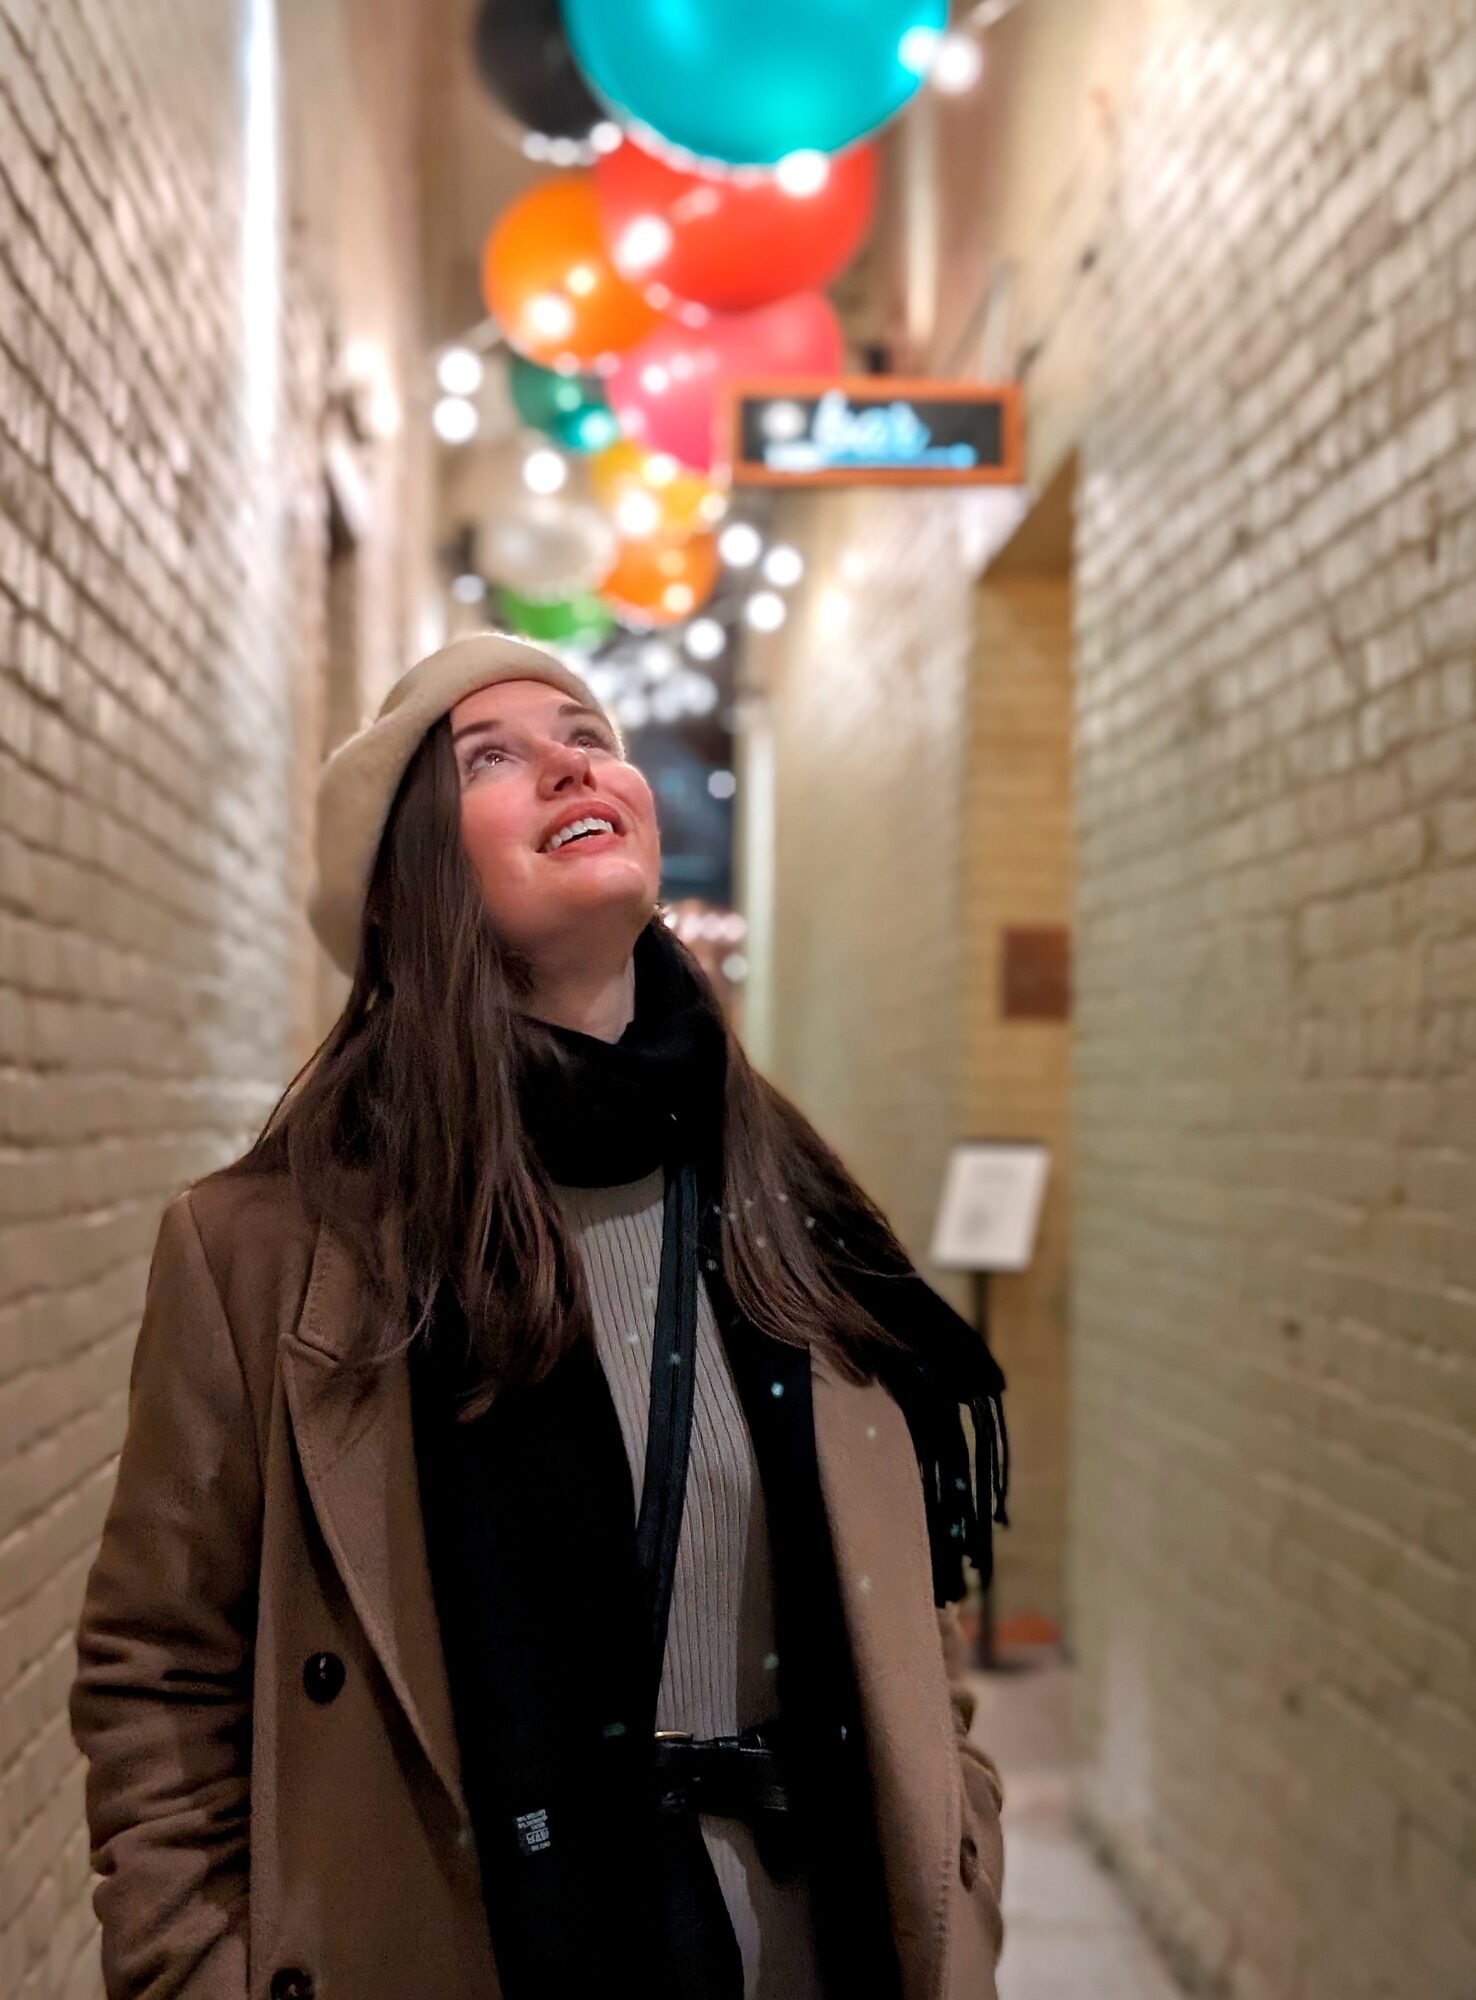 Alyssa looks up at bright balloons in an alley at night